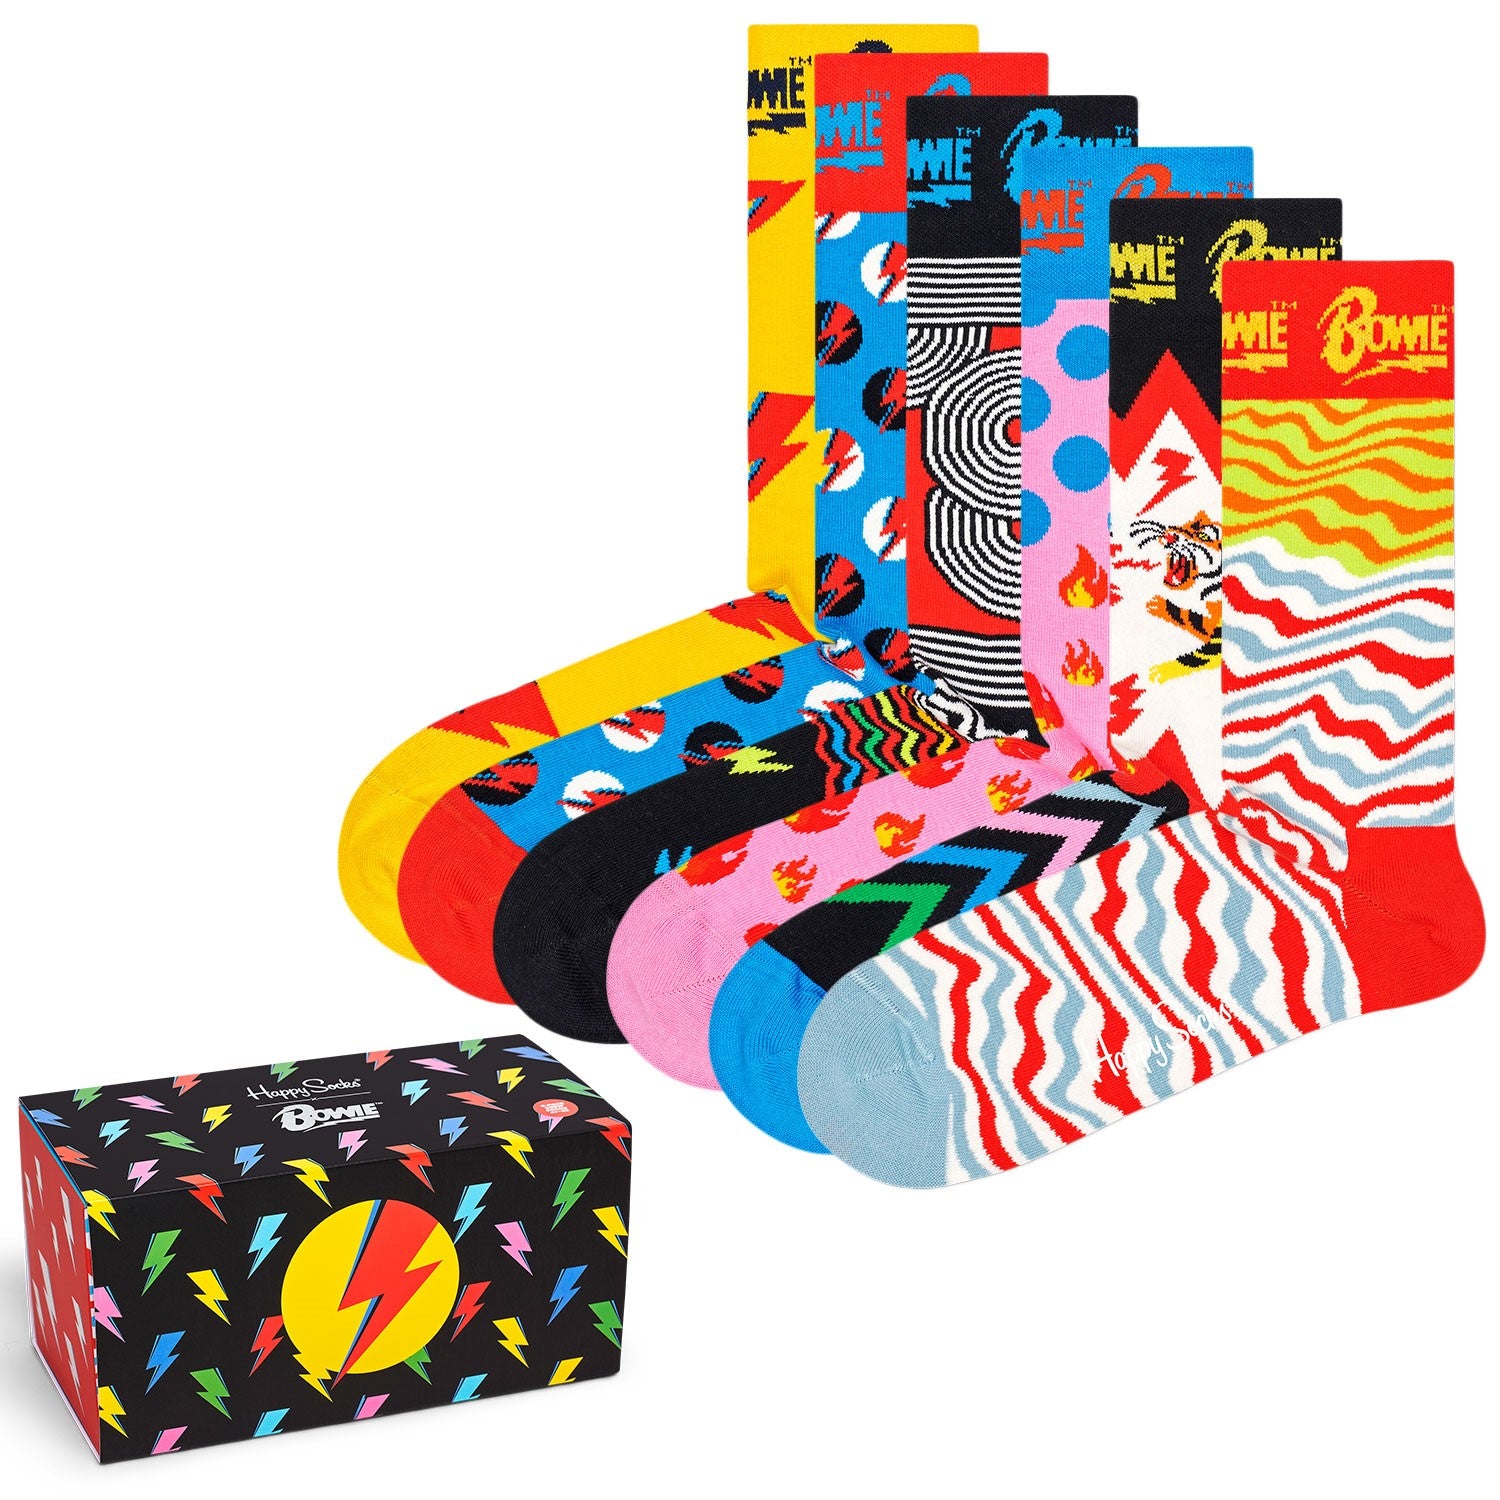 6-pack Bowie gift set